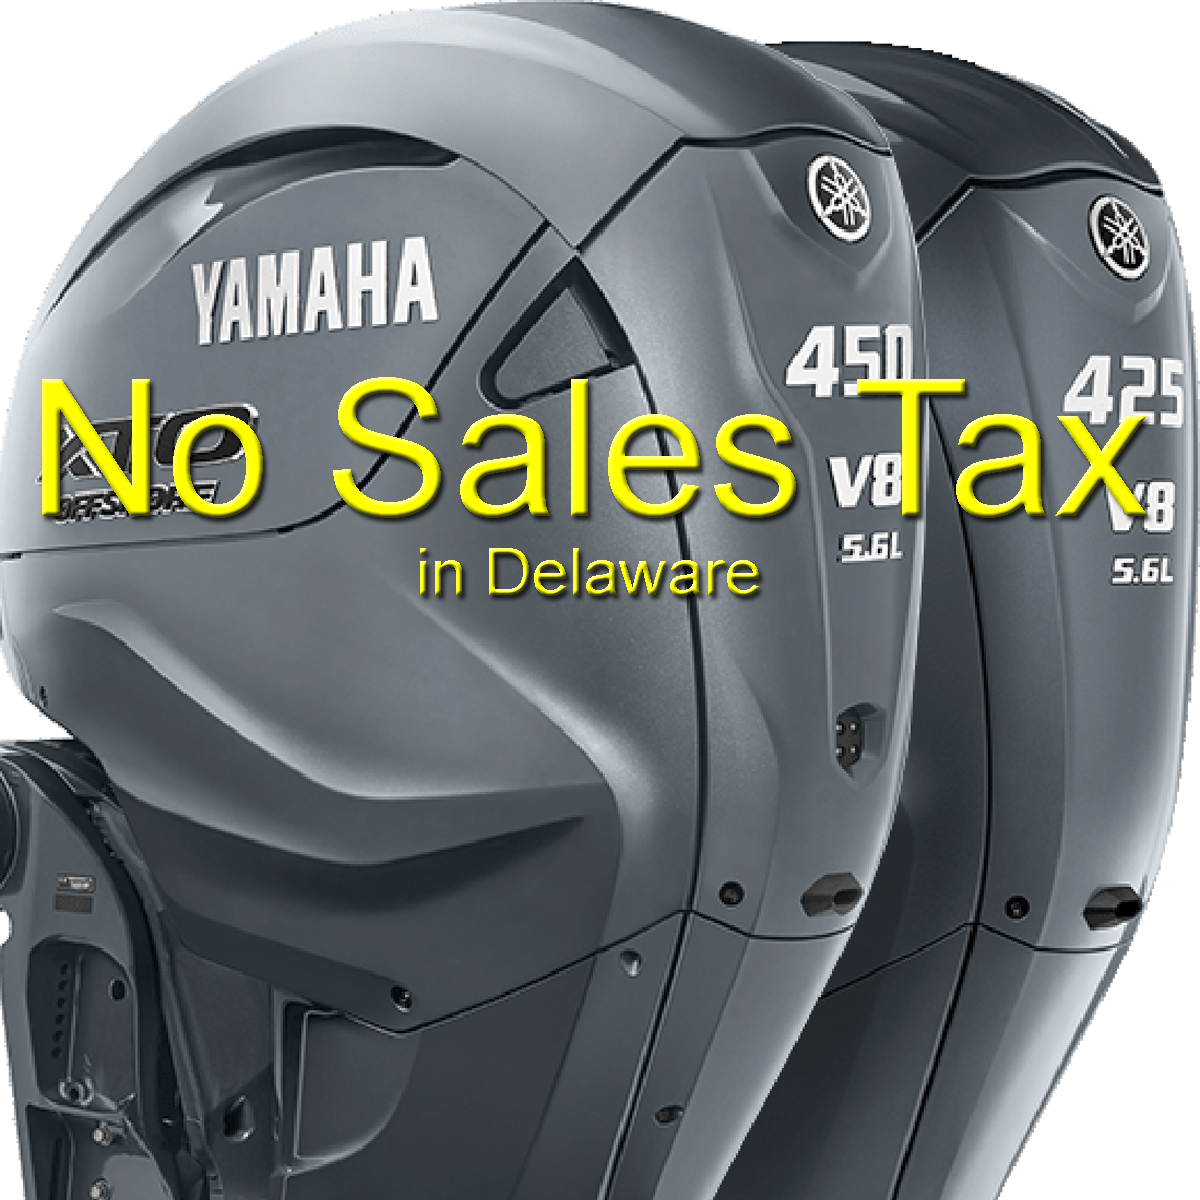 Lowest Price Yamaha Outboards - No Sales Tax in DE